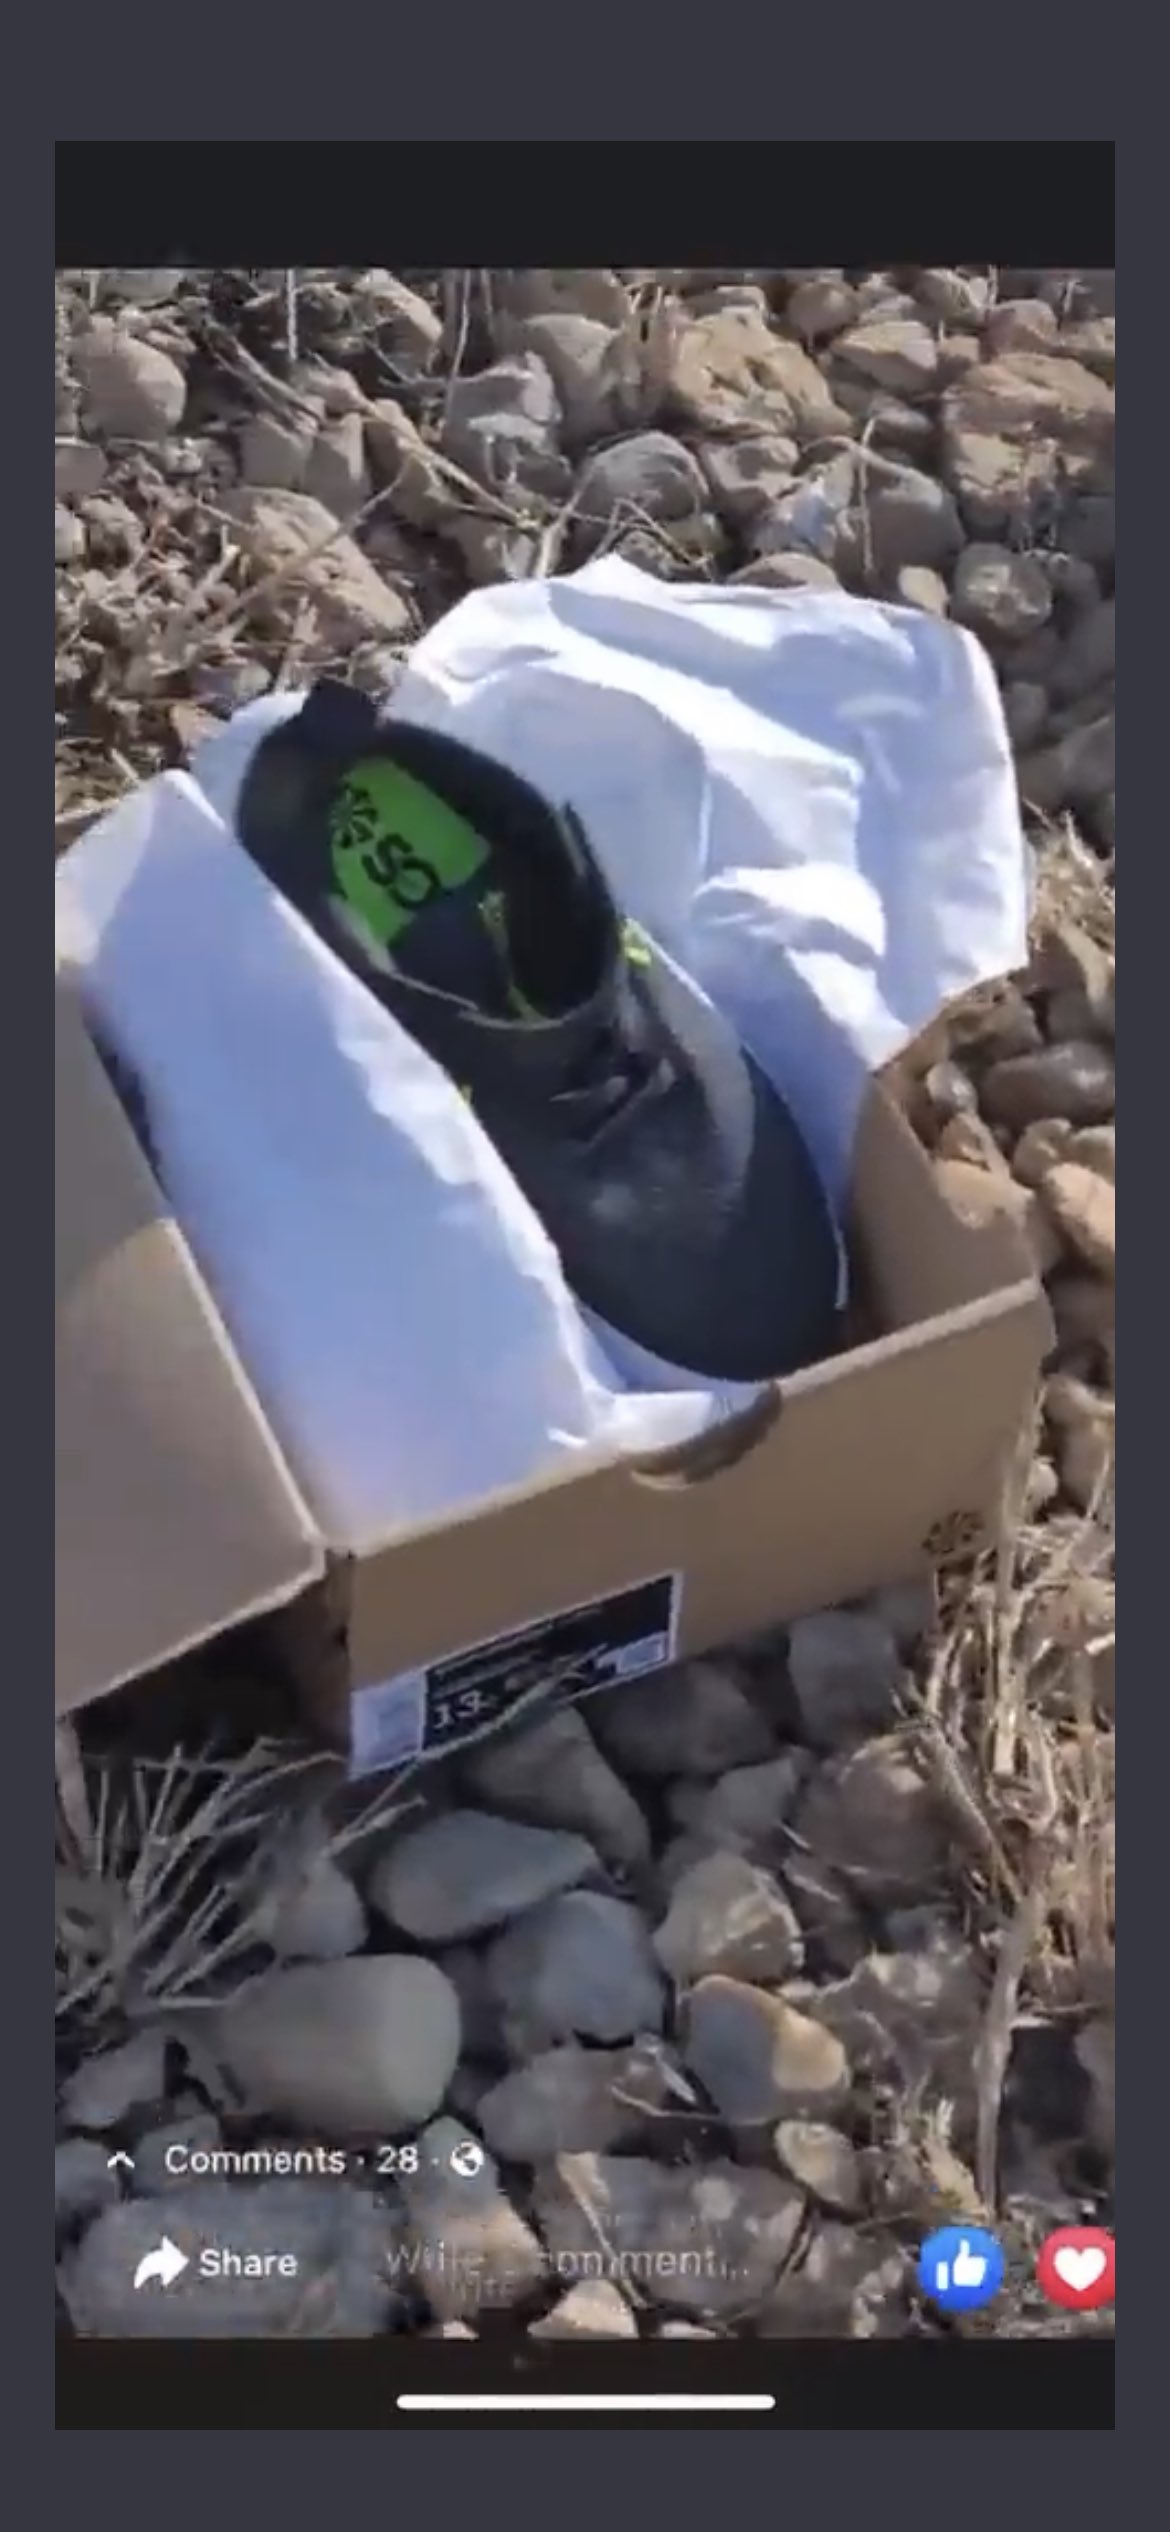 YouTube Guy on Twitter: "Looks like some Nike orders might be getting  canceled soon - seems like a few trailers got ransacked in Memphis  recently. https://t.co/PrQlAQPG0C" / Twitter